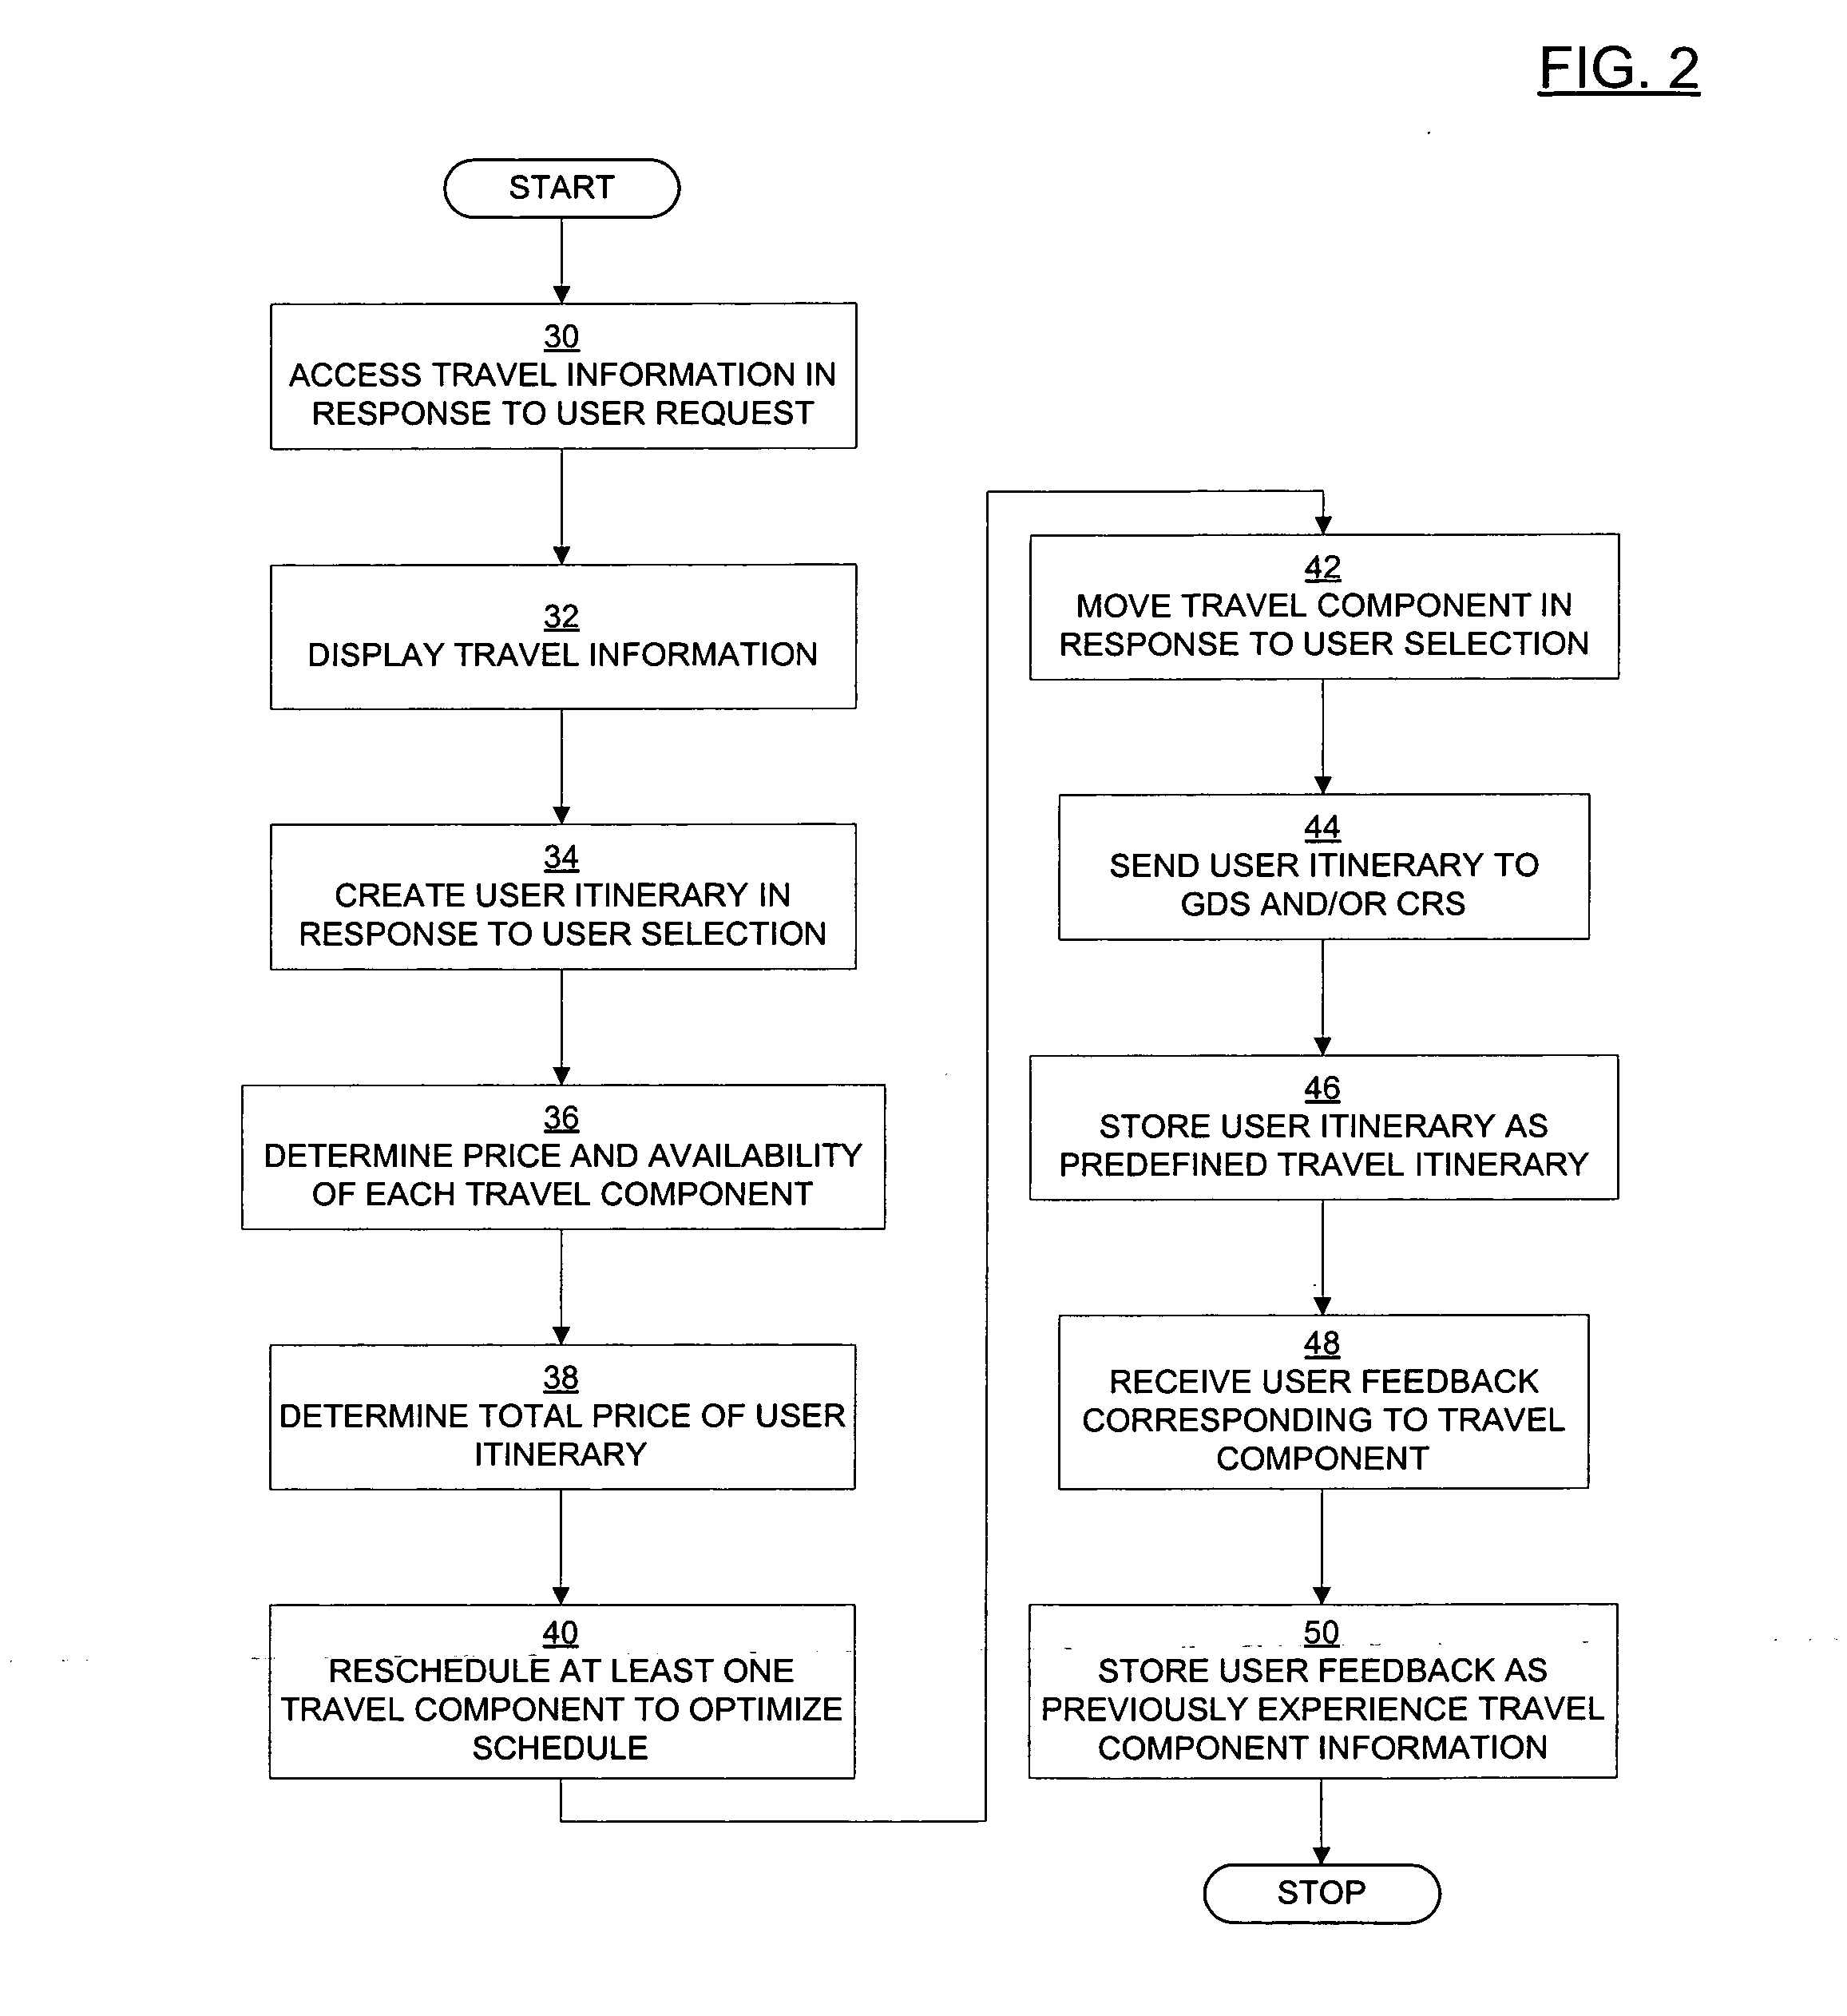 System, method, and computer program product for providing travel information using information obtained from other travelers